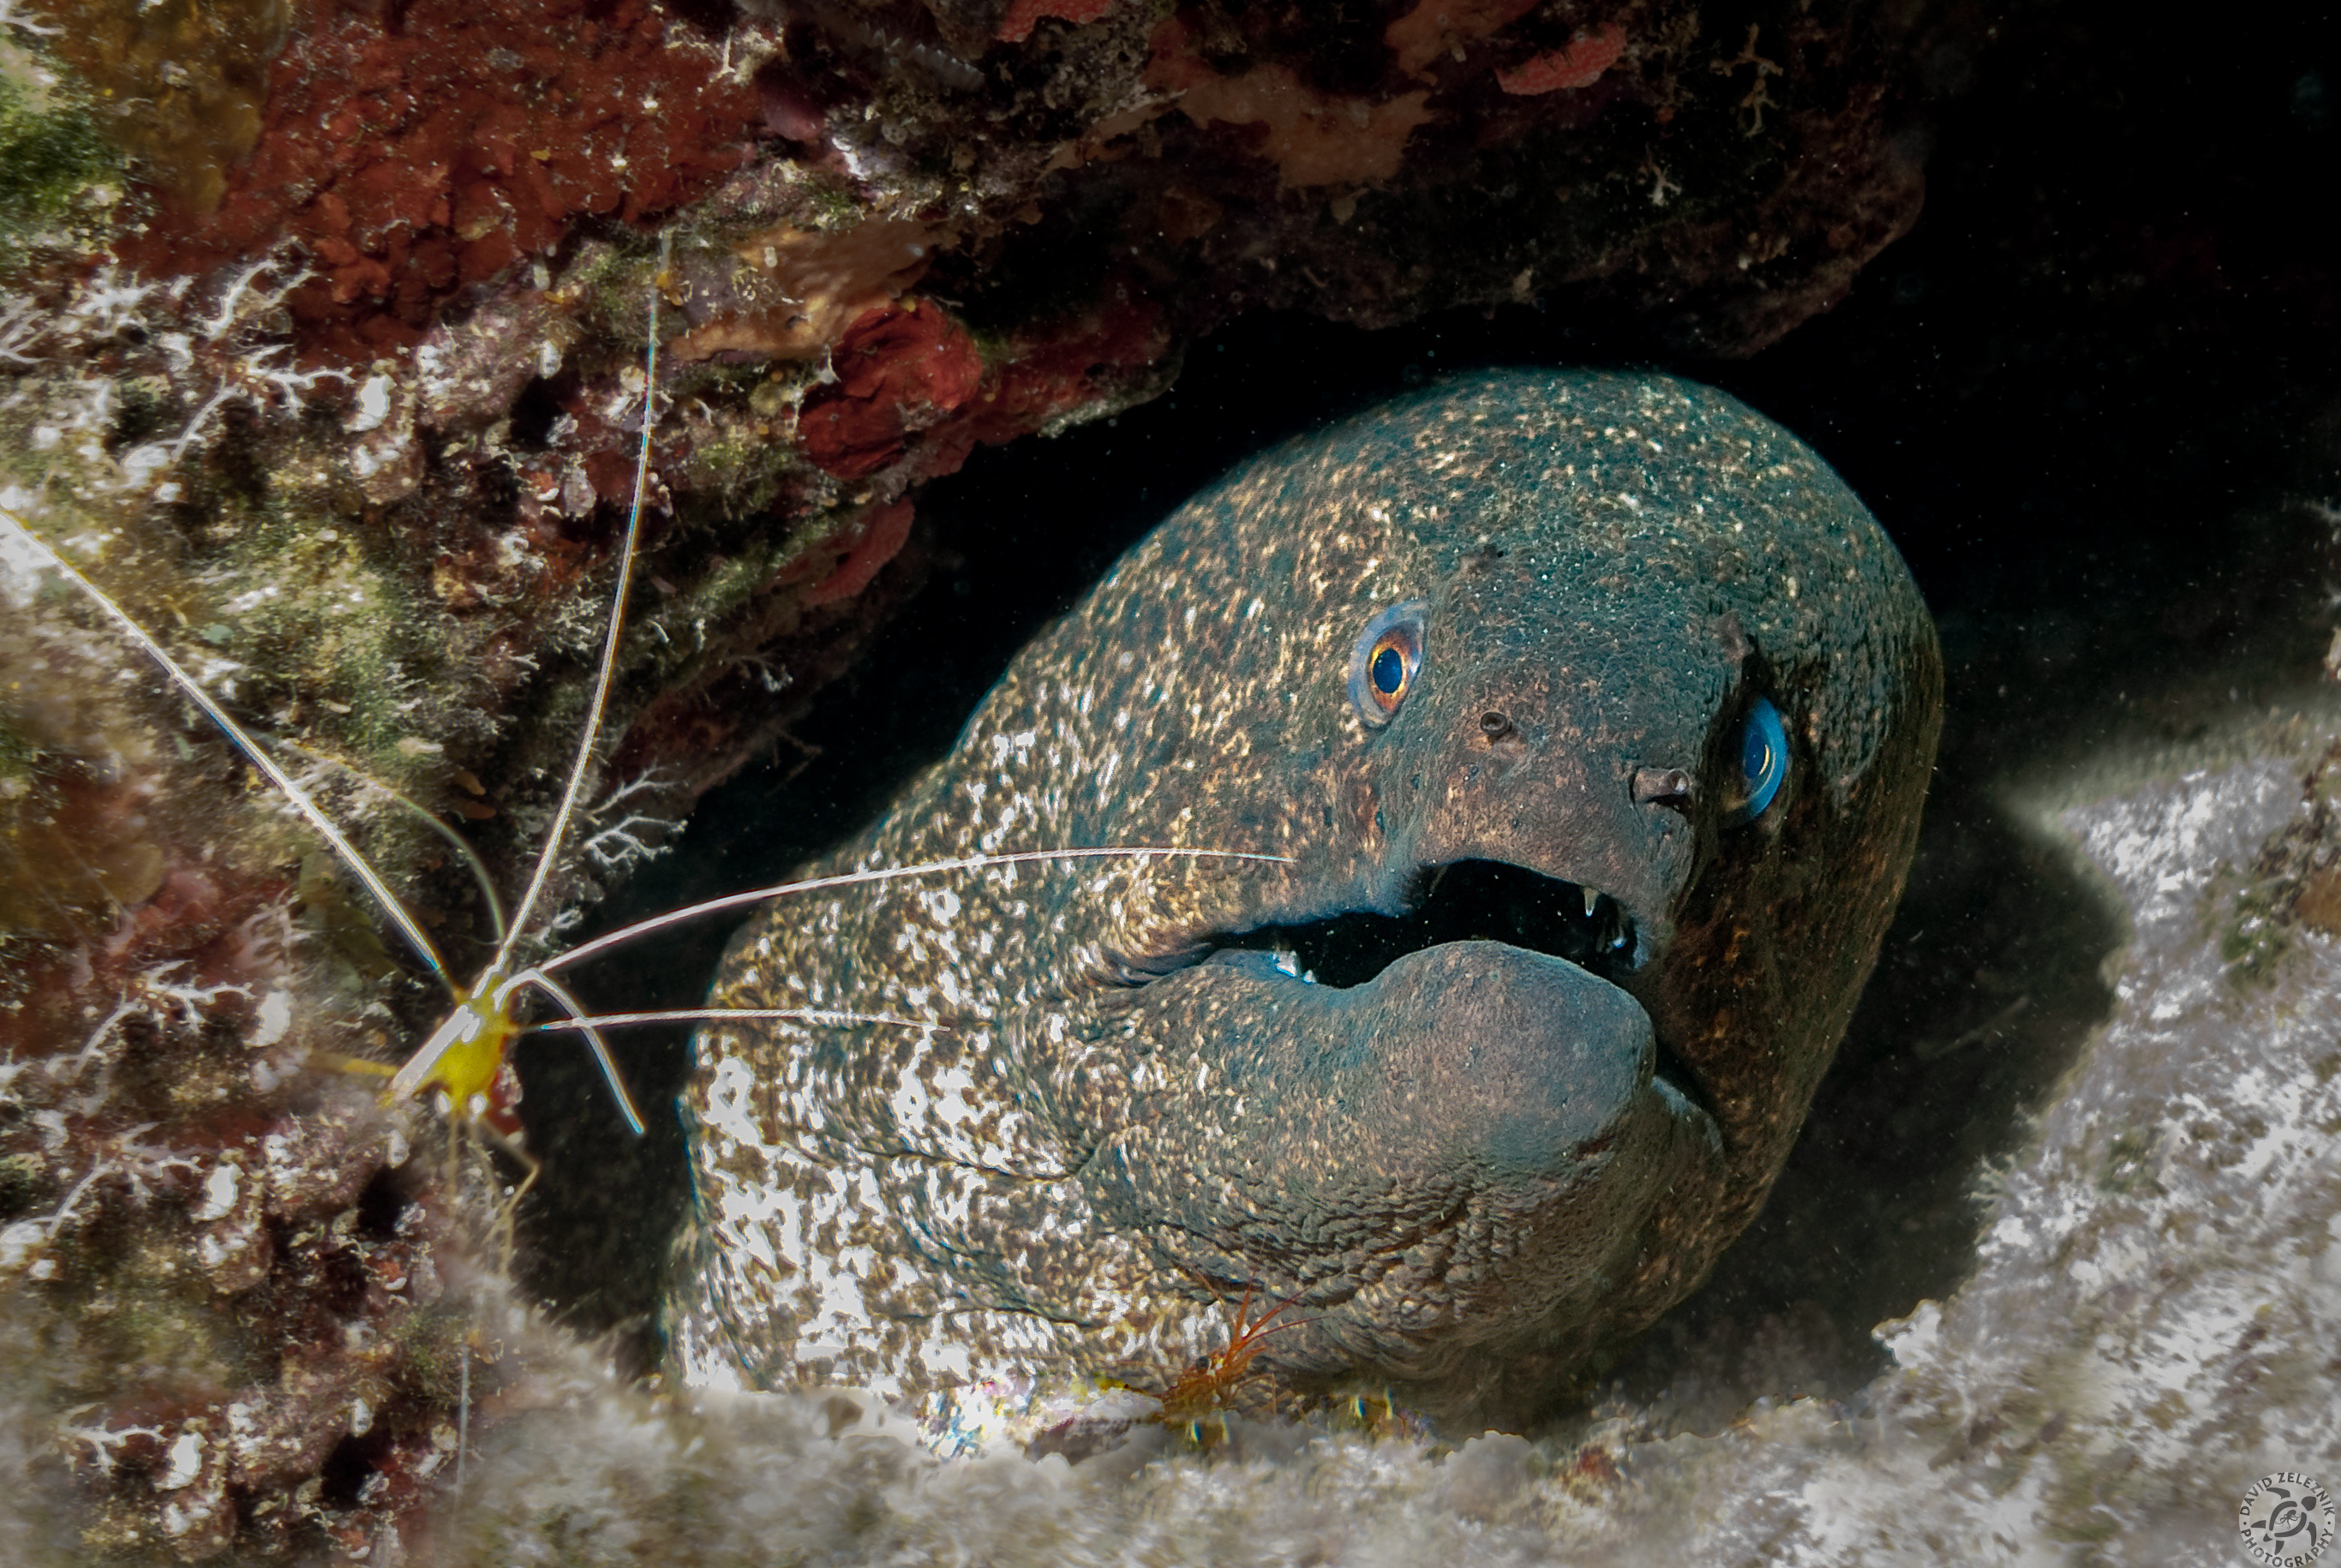 One of my first dives with my first digital setup was off the Waianae coast of Oahu where I found this Giant Moray sharing space with a couple of cleaner shrimp